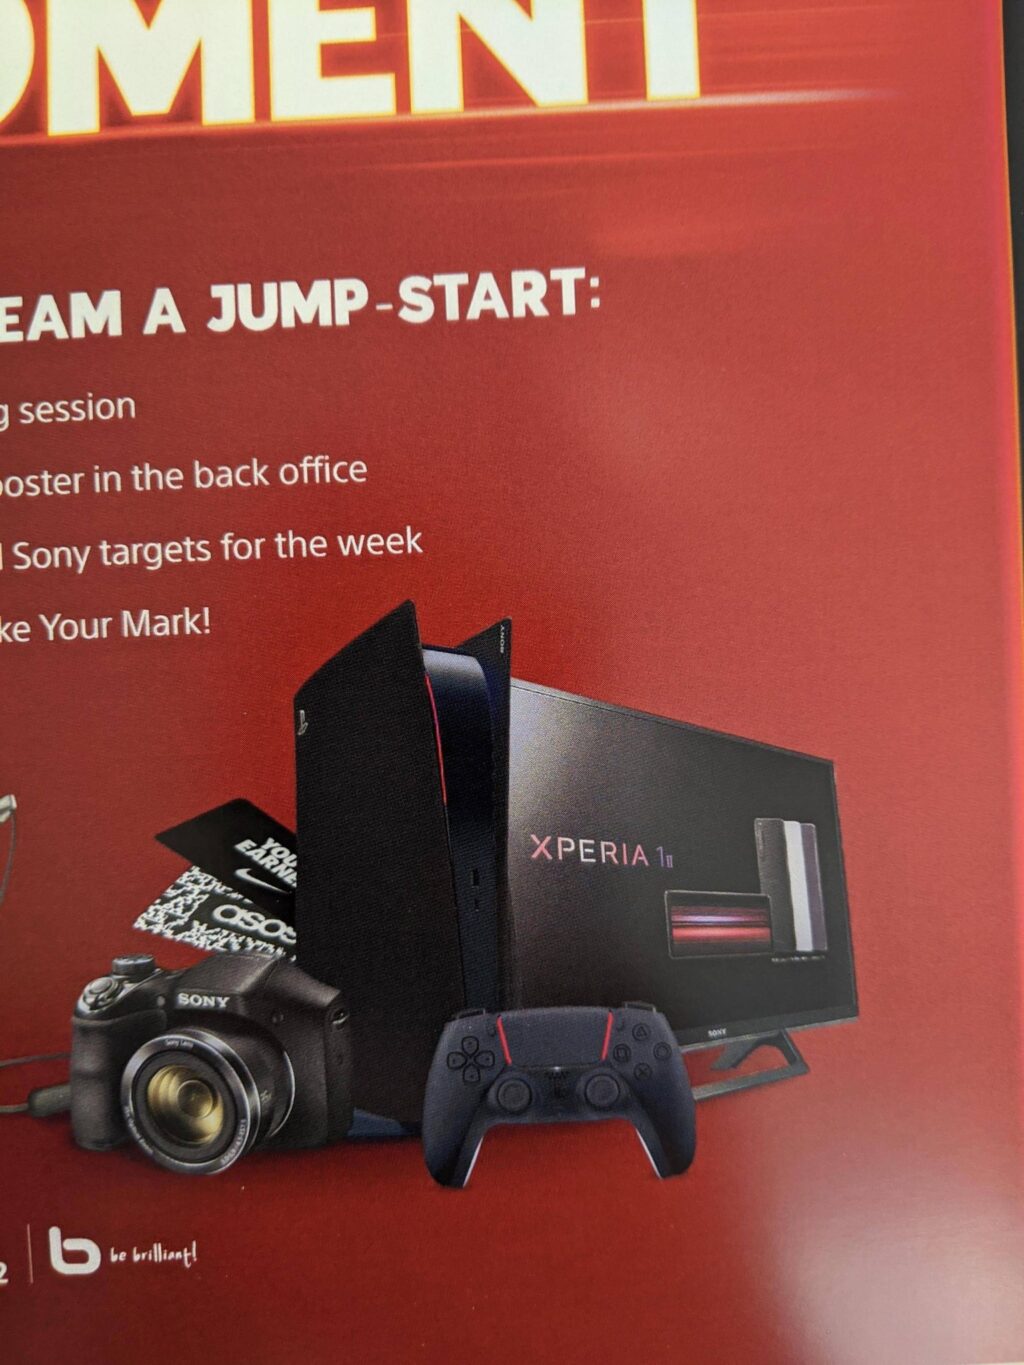 Apparently this is a leaked promo ad featuring a Black PS5, looks ?